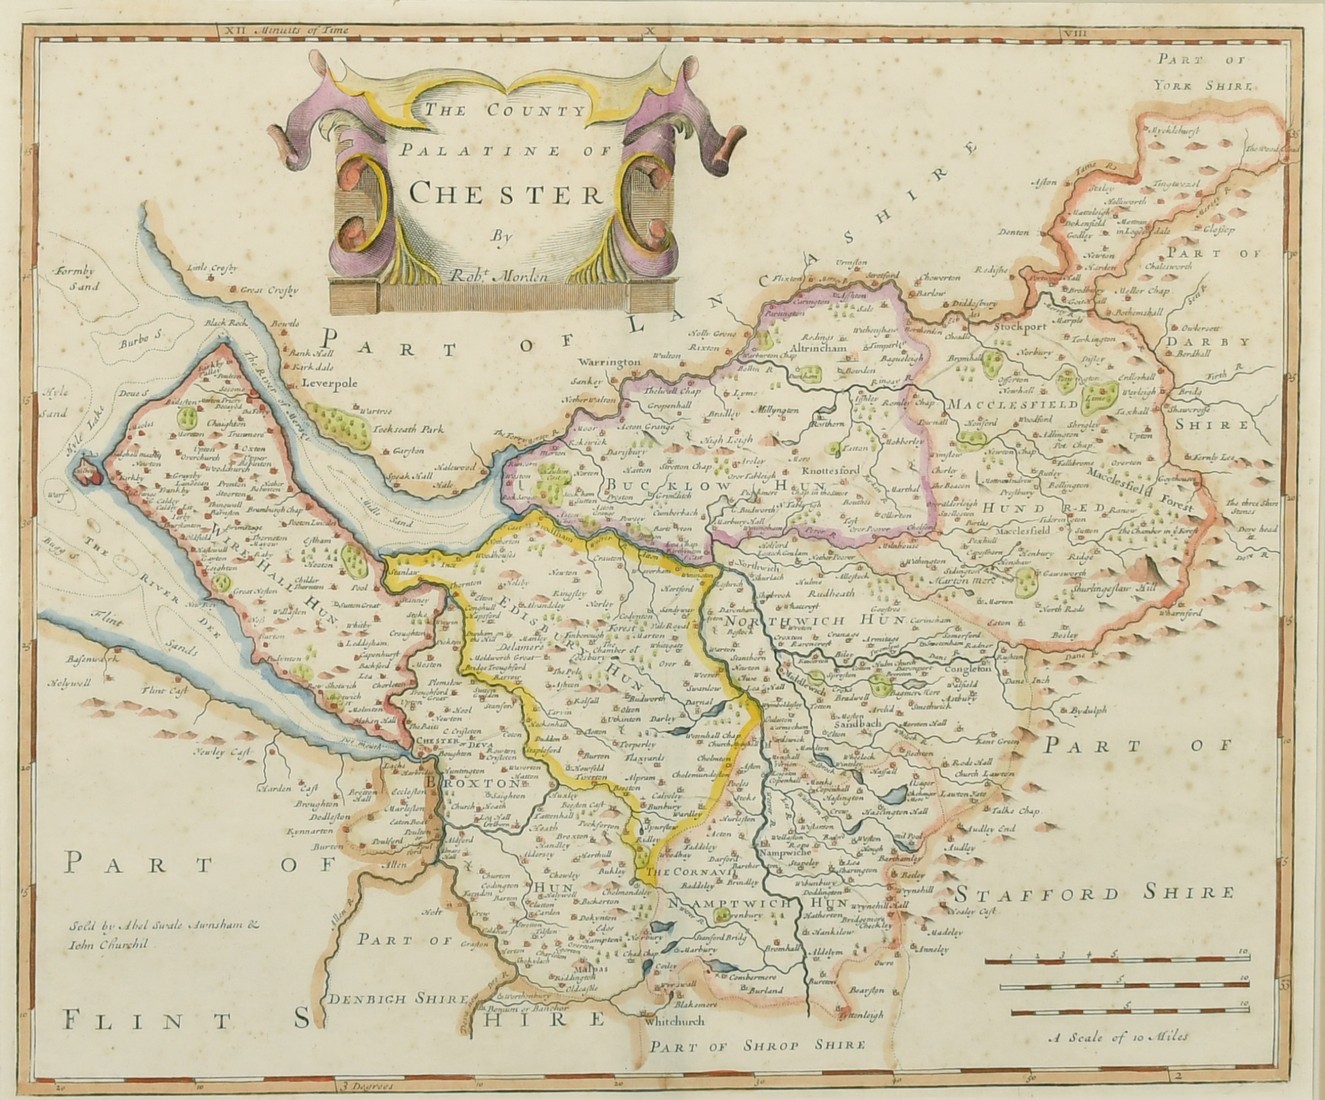 The County Palatine of Chester, by Robert Morden, outline coloured, engraving, 18th Century, 14" x